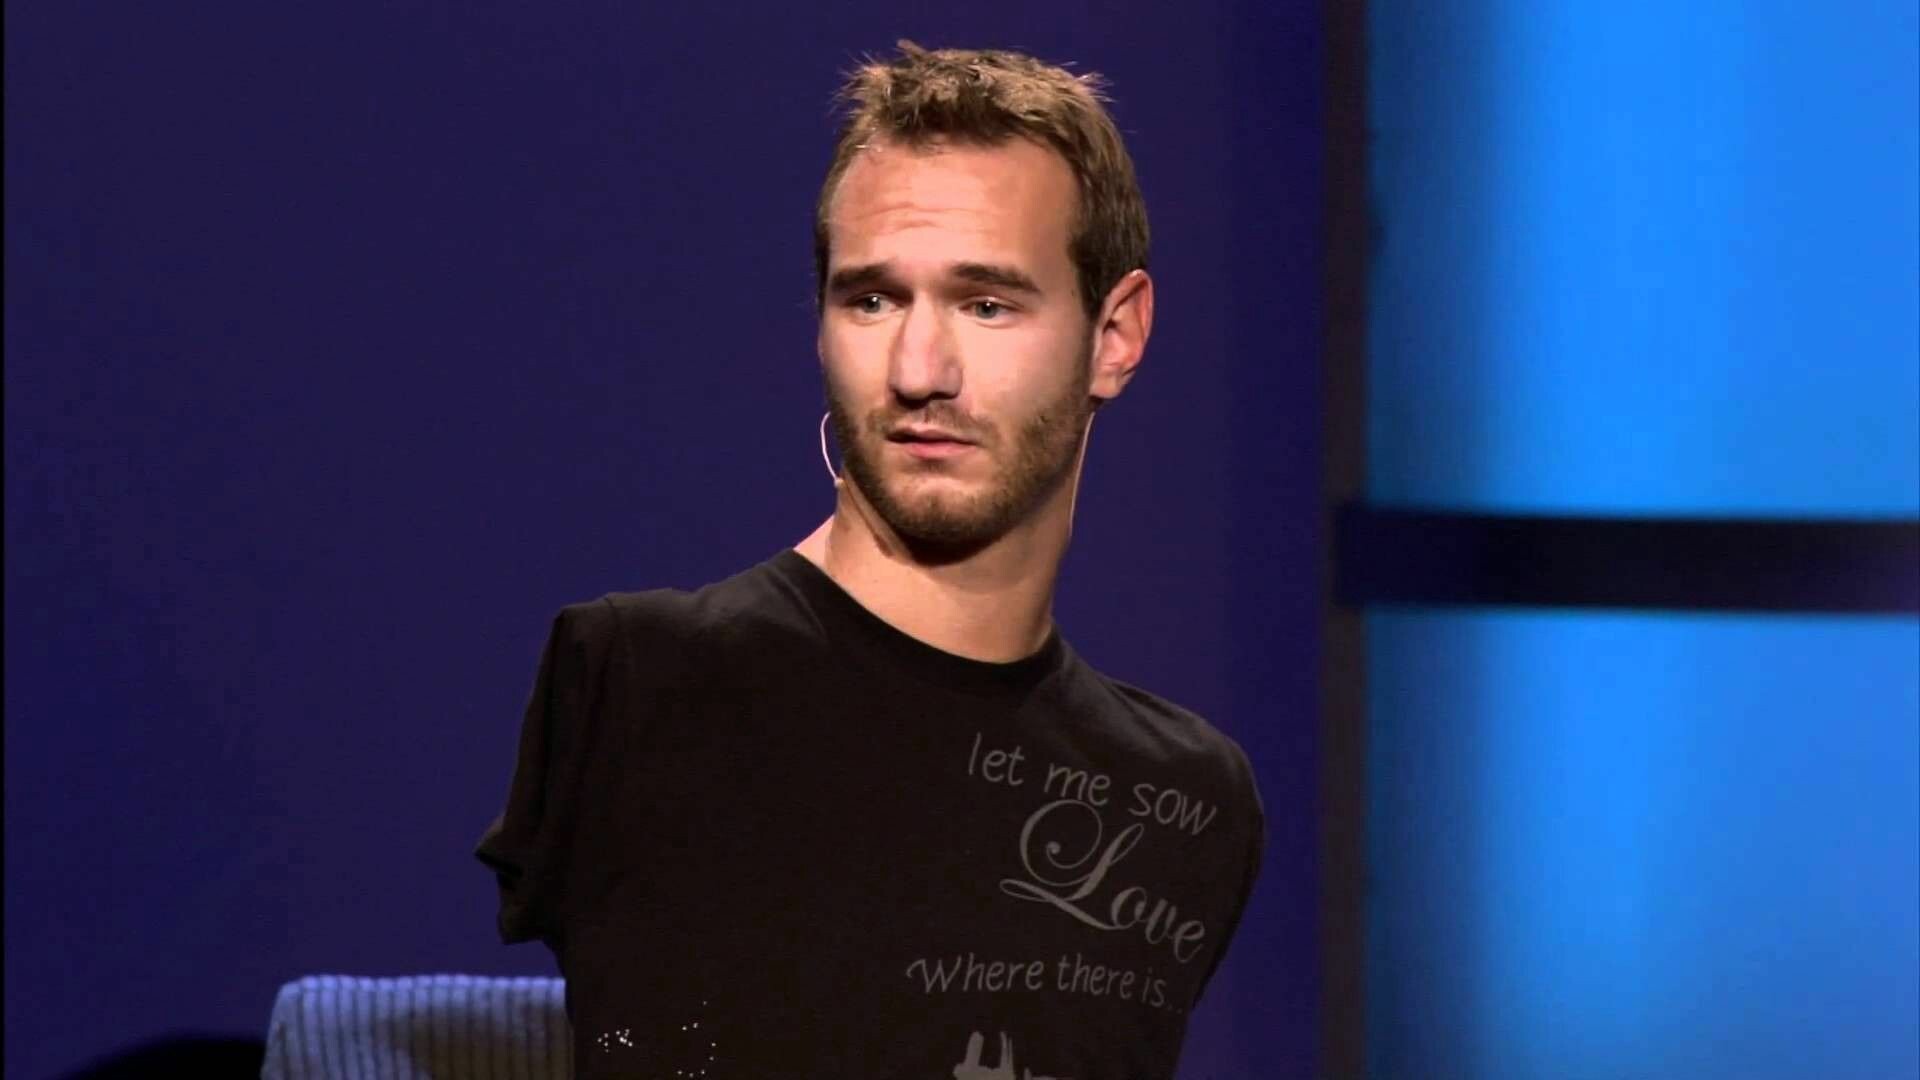 Nick Vujicic: Wrote a book, Limitless: Devotions for a Ridiculously Good Life (2013). 1920x1080 Full HD Wallpaper.